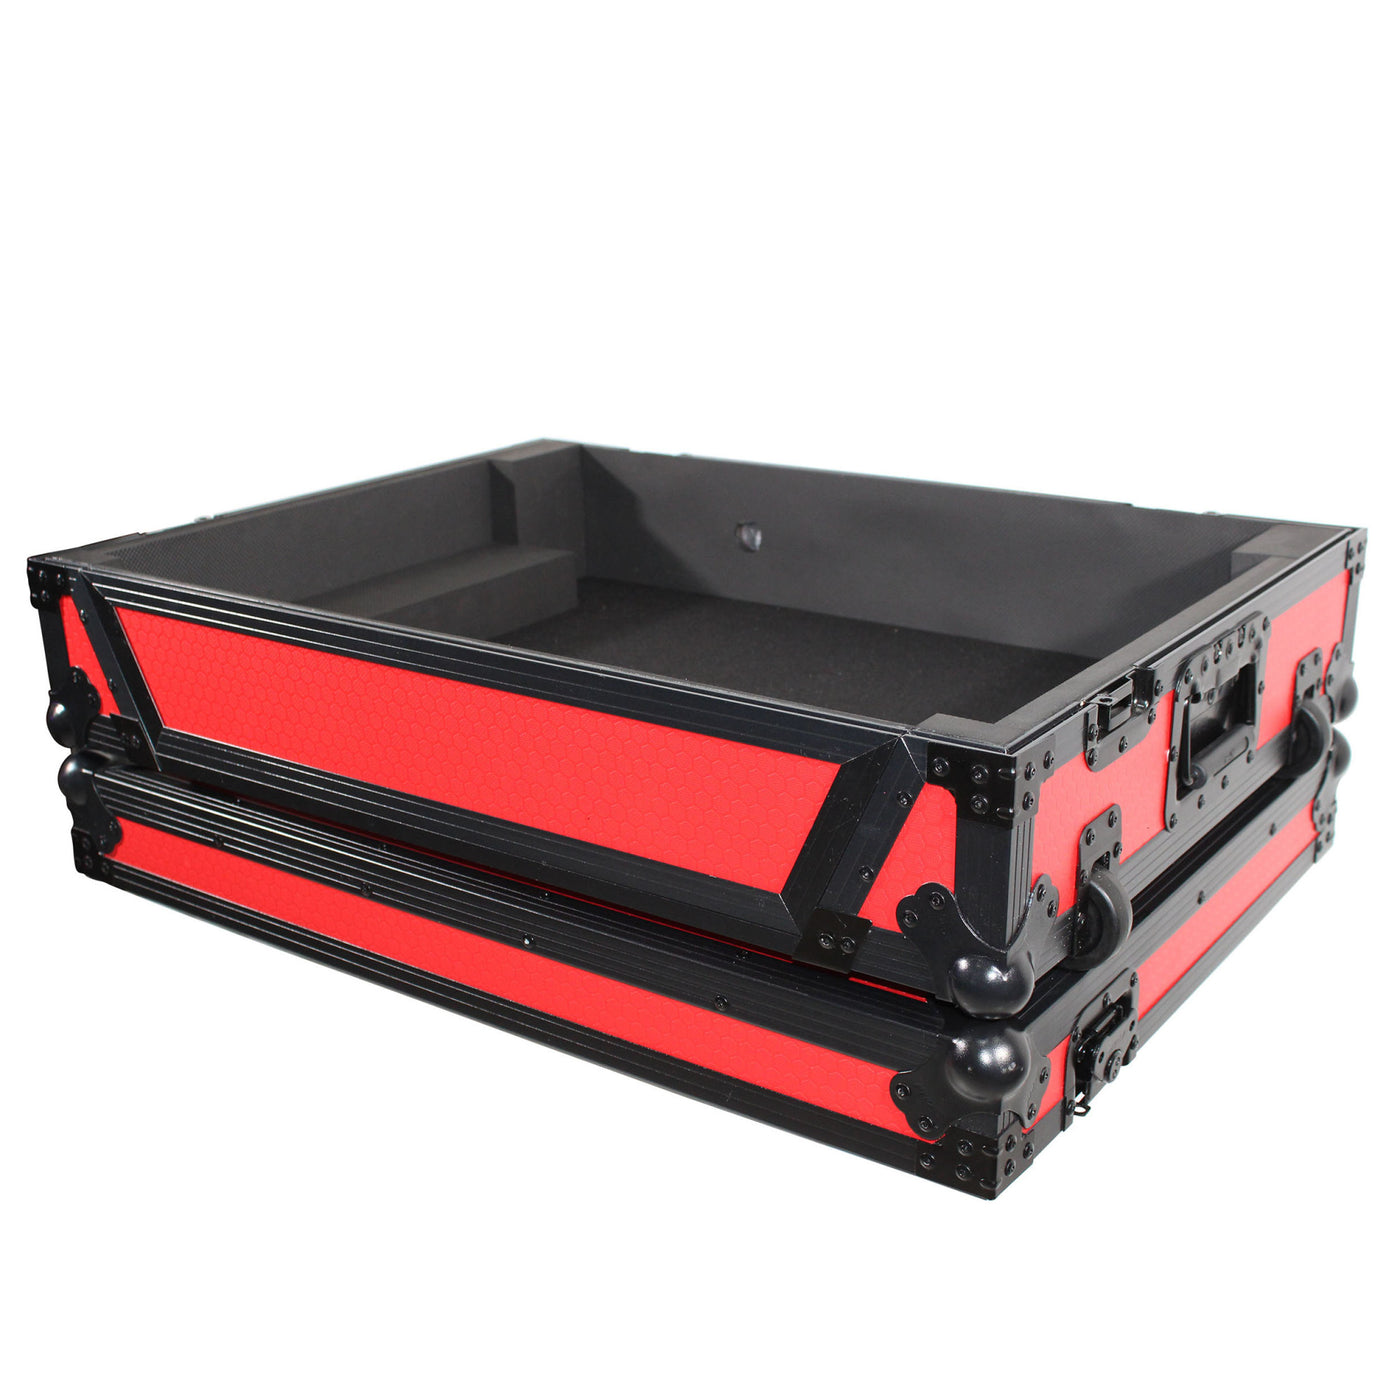 ProX XS-PRIME4WRB ATA-300 Style Flight Case, For Denon PRIME 4 DJ Controller, With 1U Rack Space and Wheels, Pro Audio Equipment Storage, Red Black